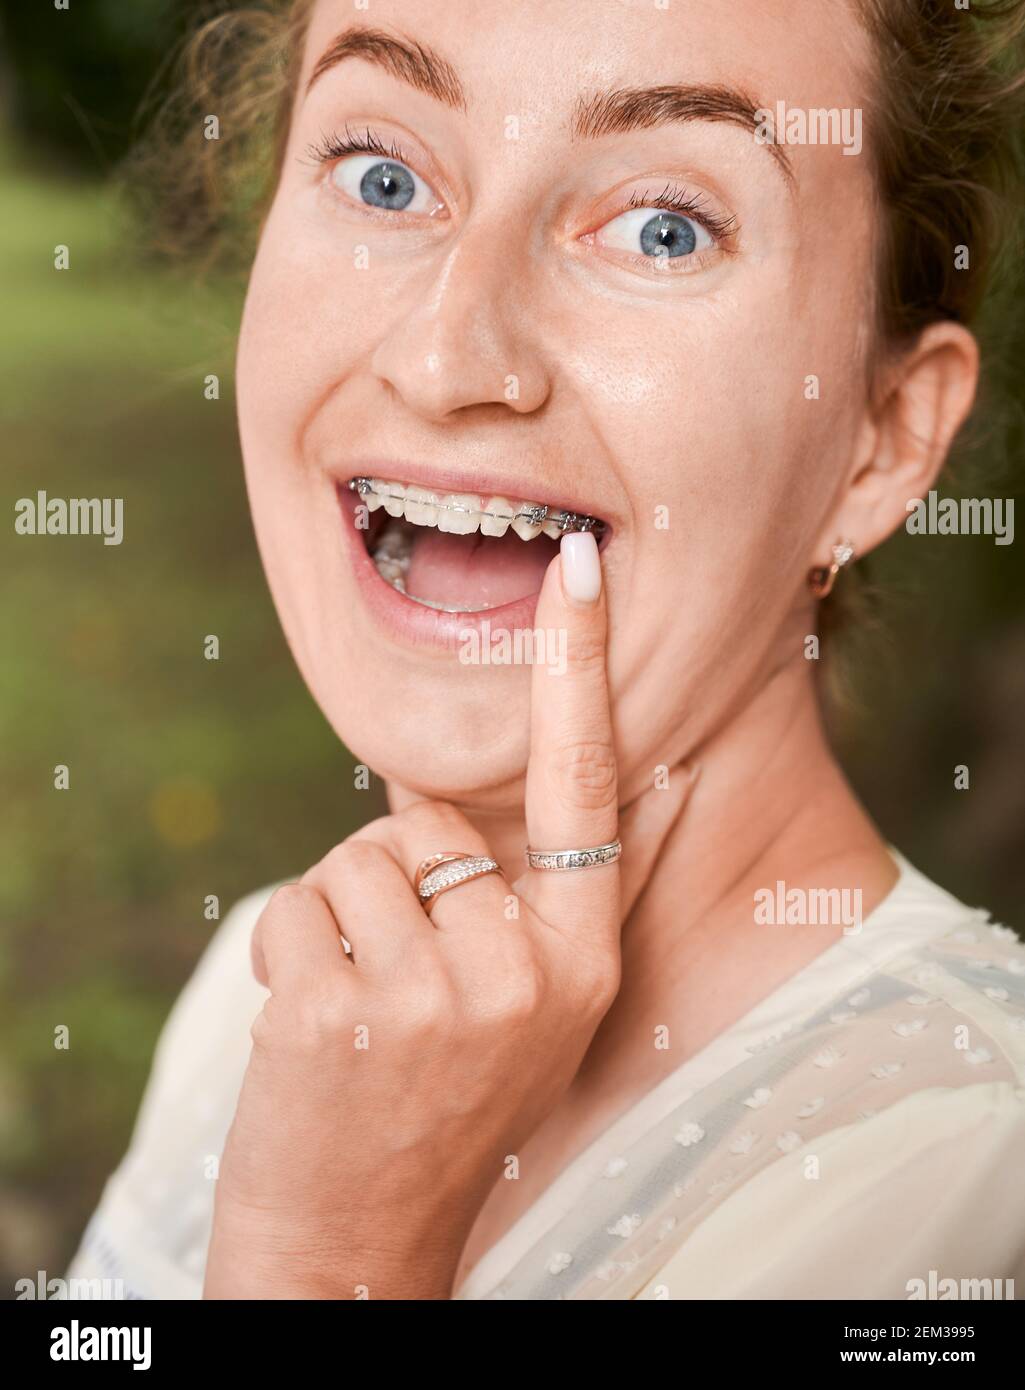 Close up of young woman pointing at orthodontic brackets on teeth. Charming female patient demonstrating results of dental braces treatment. Concept of dentistry and orthodontic treatment. Stock Photo